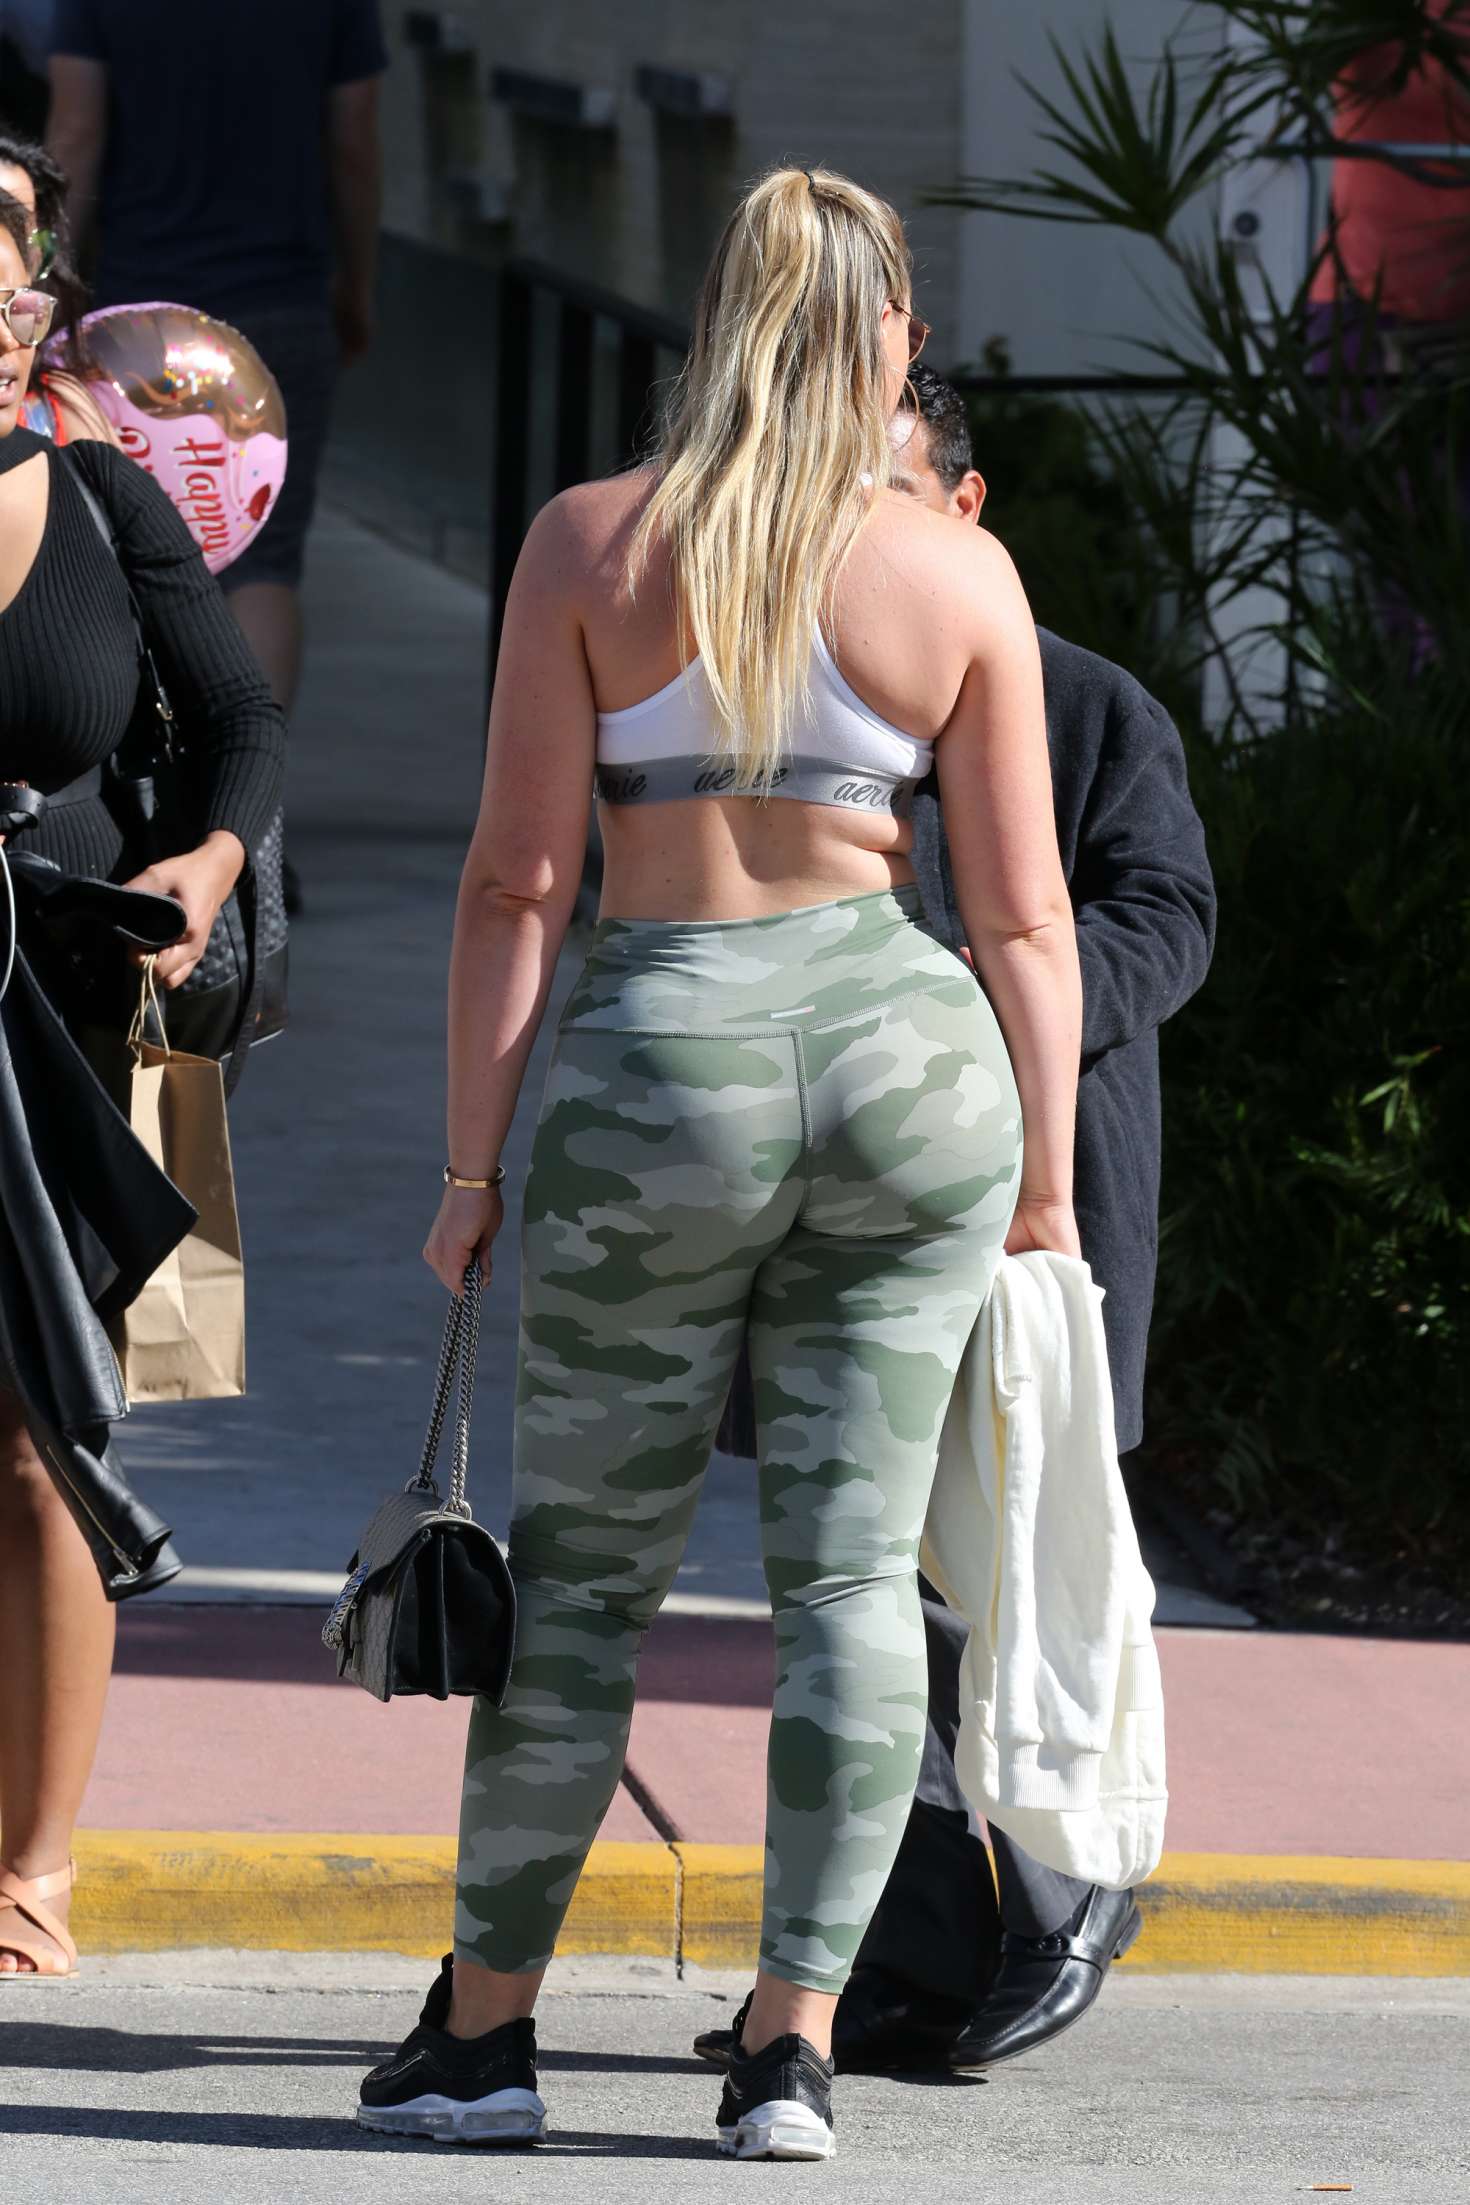 Iskra Lawrence in Yoga Pants and a sports bra -02 | GotCeleb